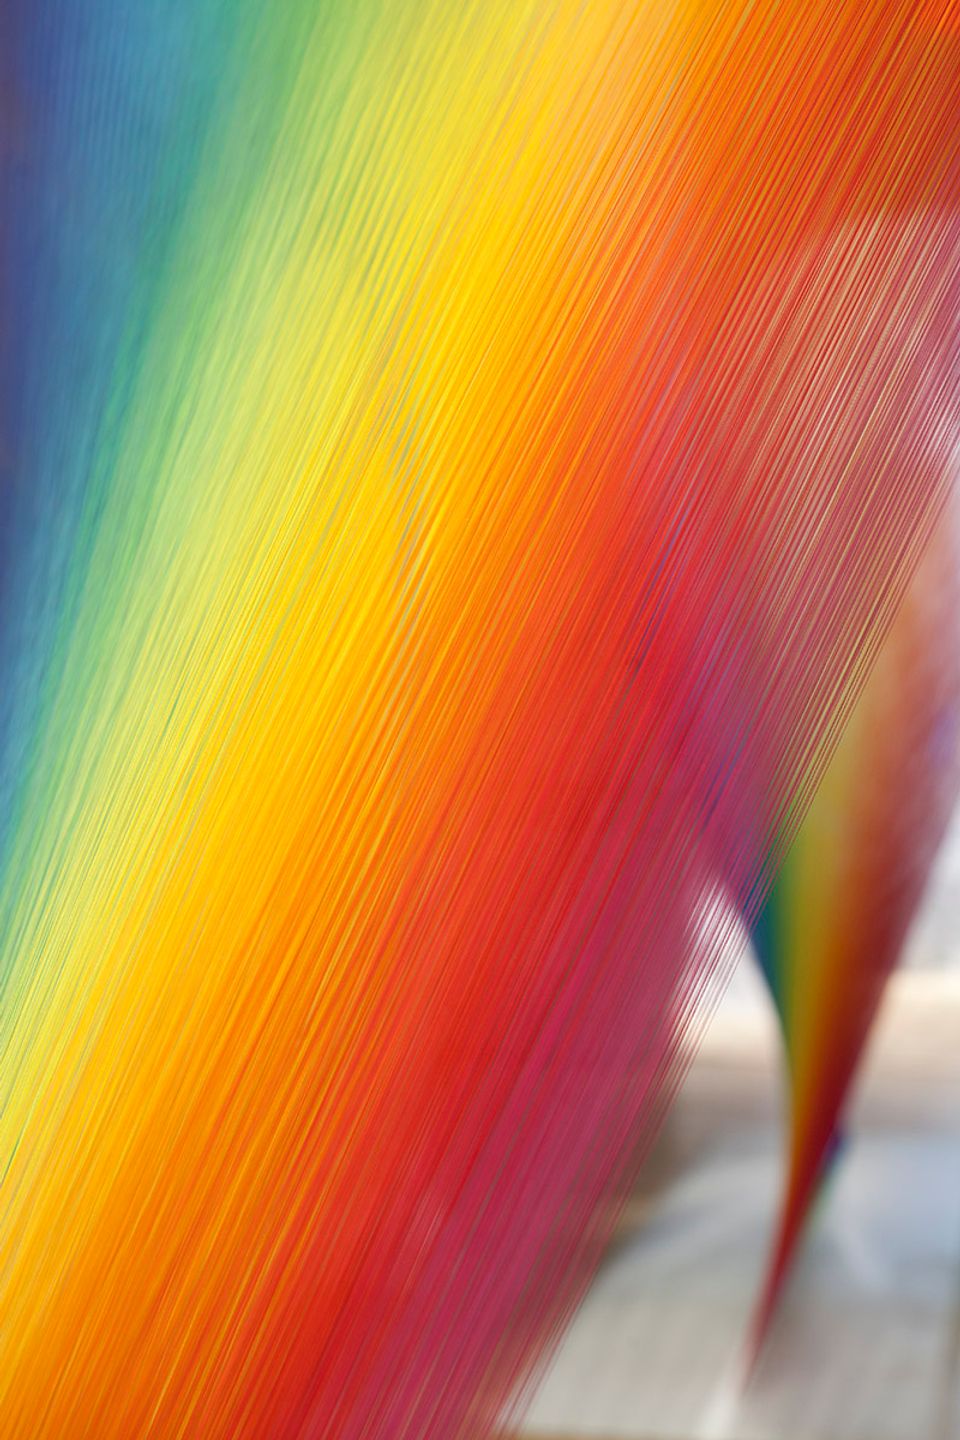 A detailed photograph of colorful string creating a rainbow affect.